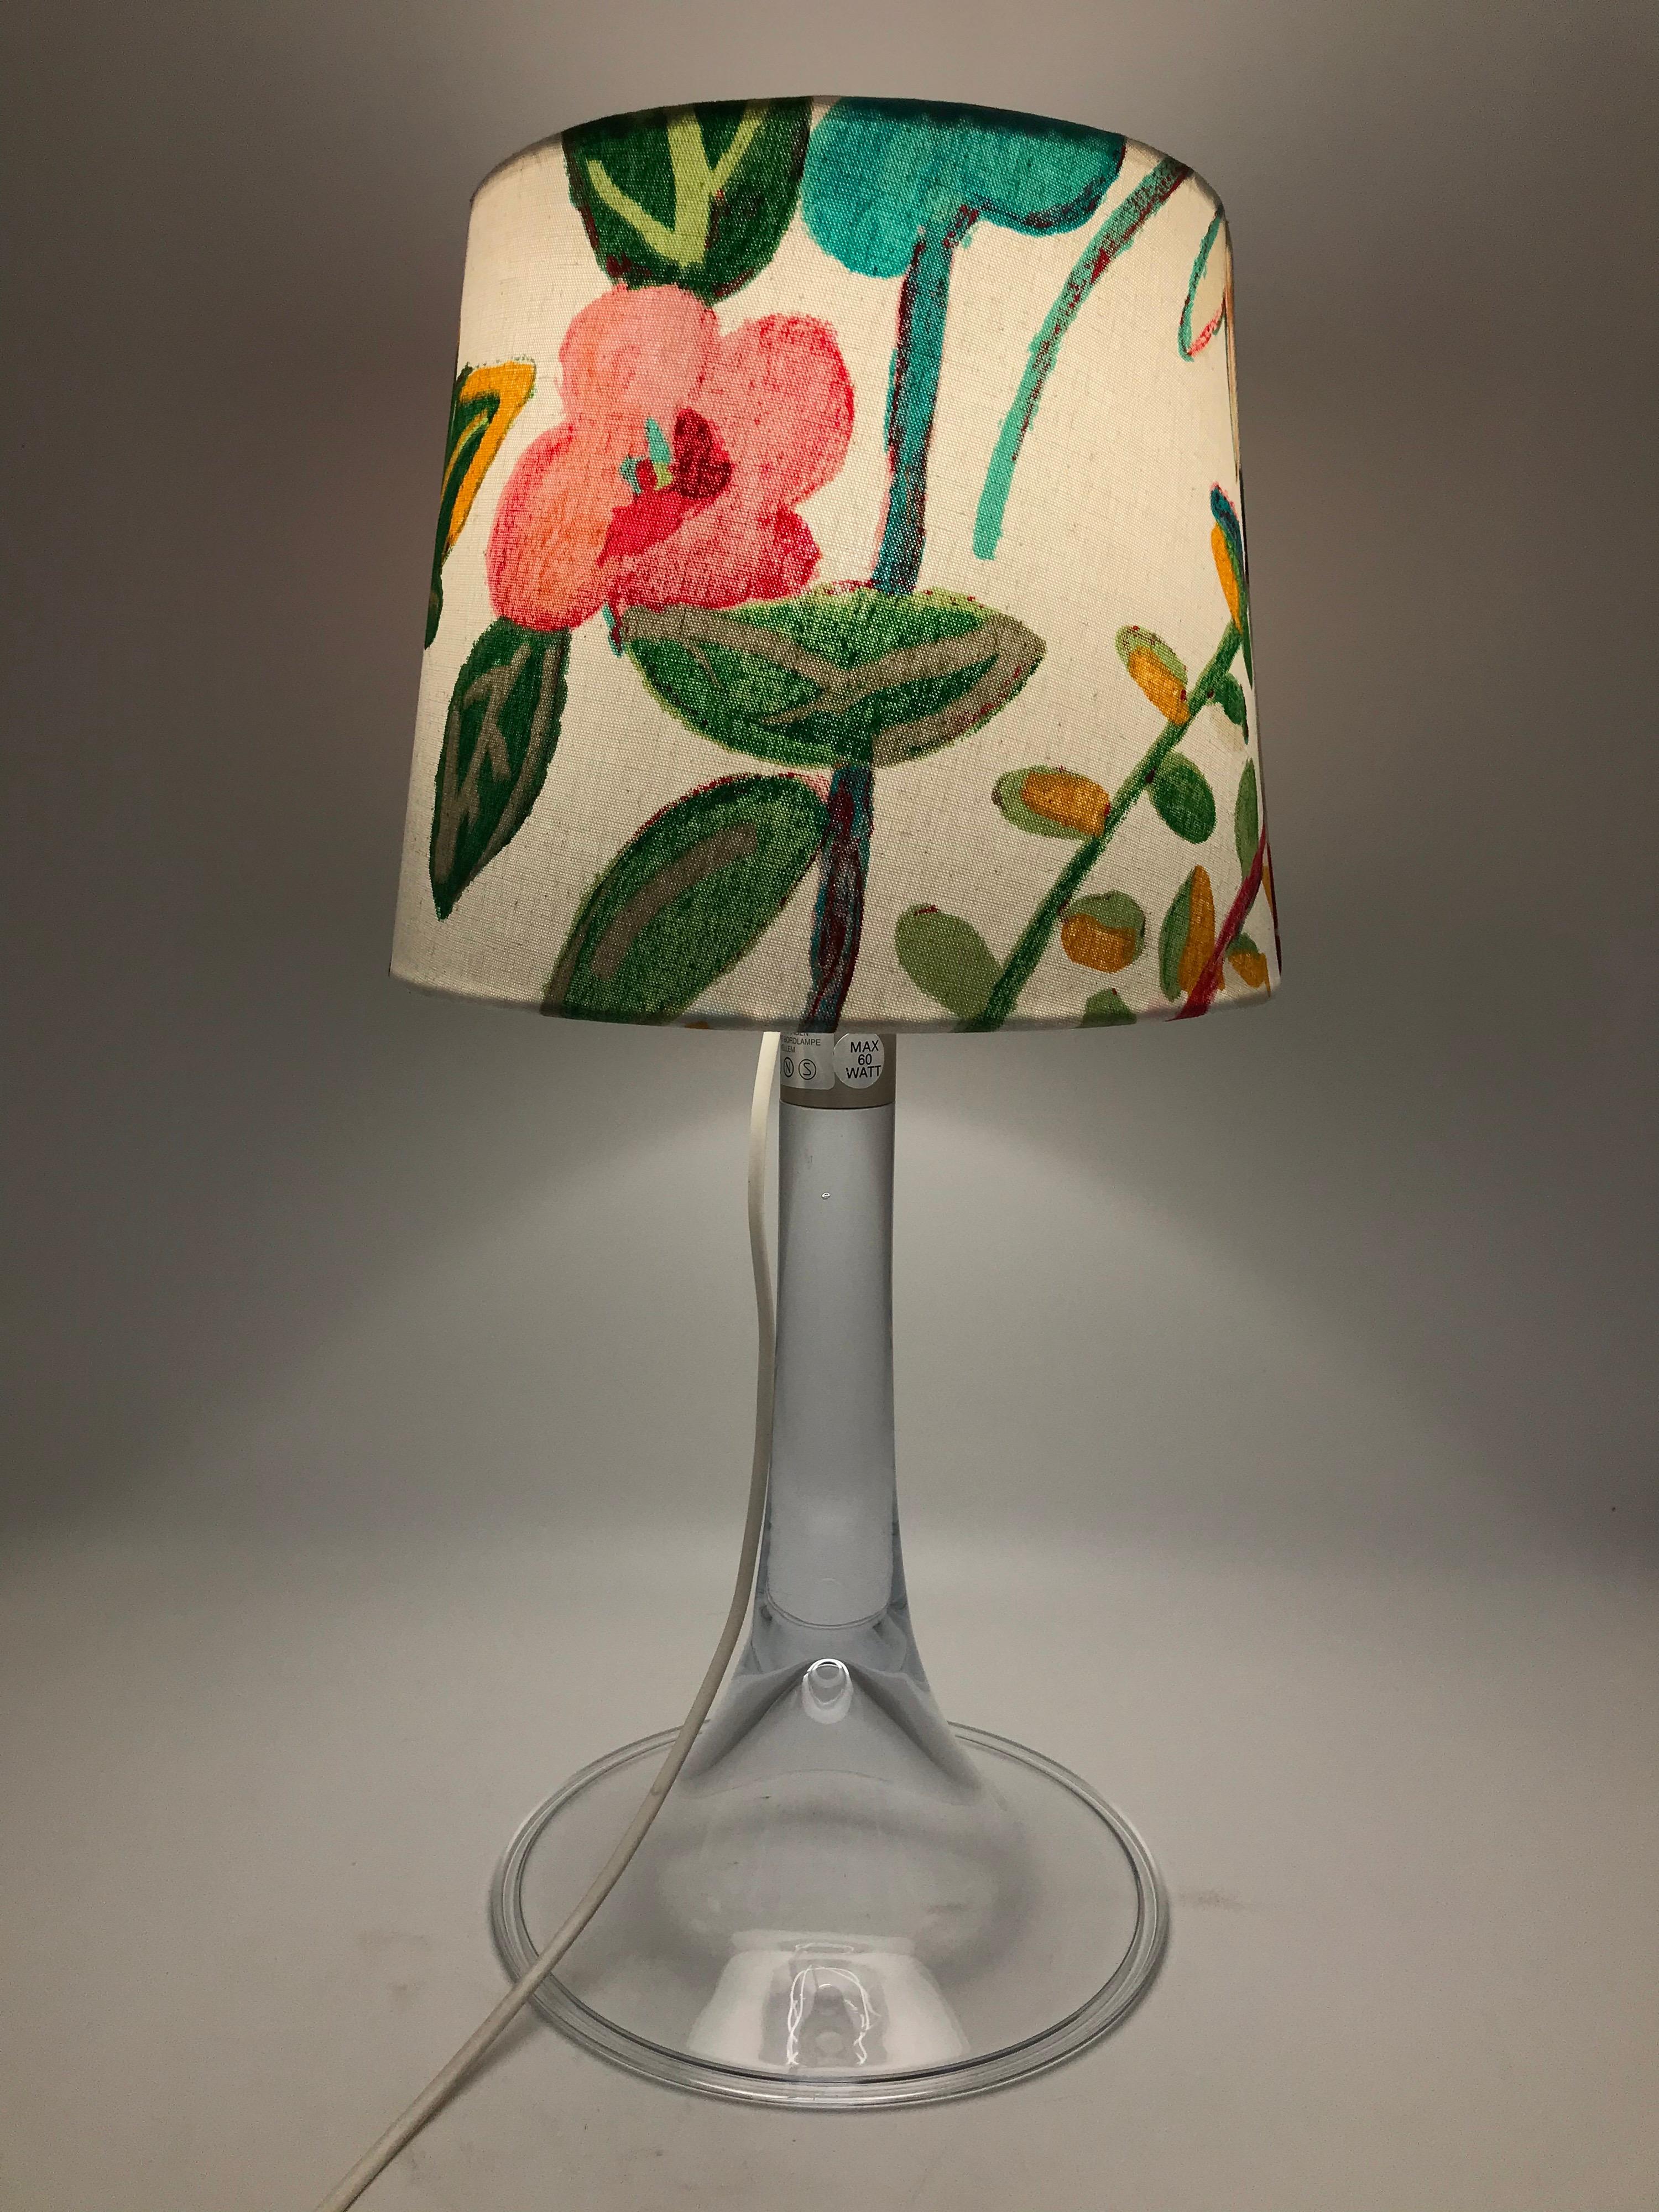 Vintage Danish Holmegaard hand blown table lamp
The lamp is in great vintage condition
Rewired with a twisted CNN moth flex.
Can be fitted with an EU UK or US plug.
 Lampshade not included